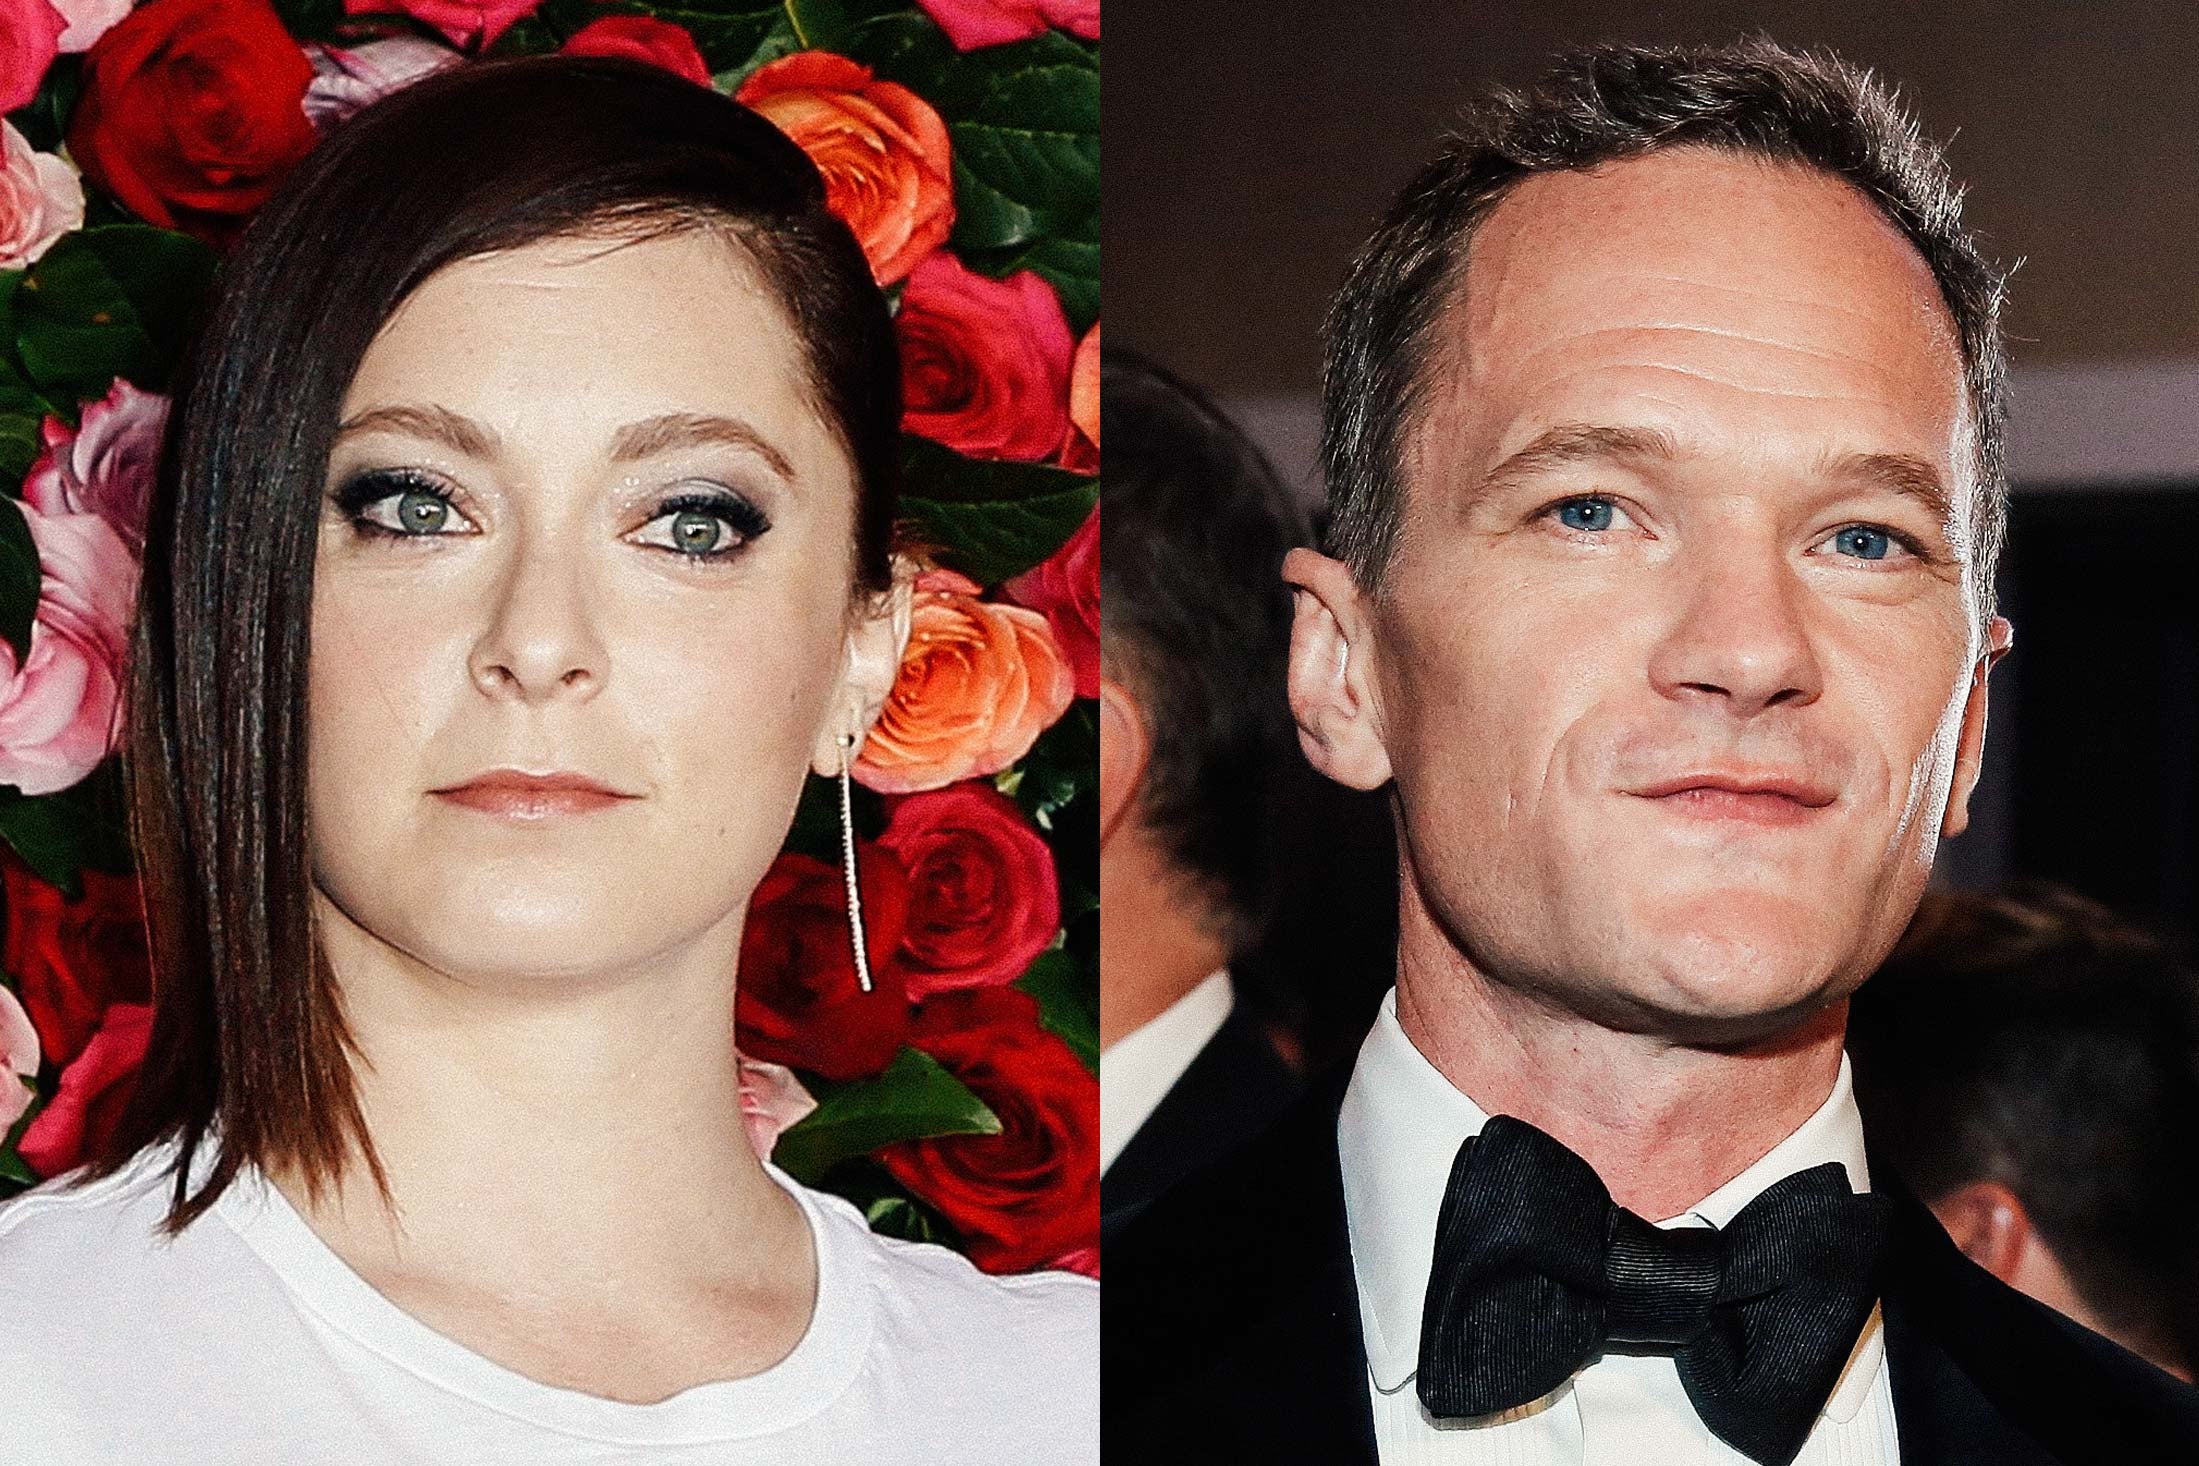 Photos of Rachel Bloom and Neil Patrick Harris, side-by-side